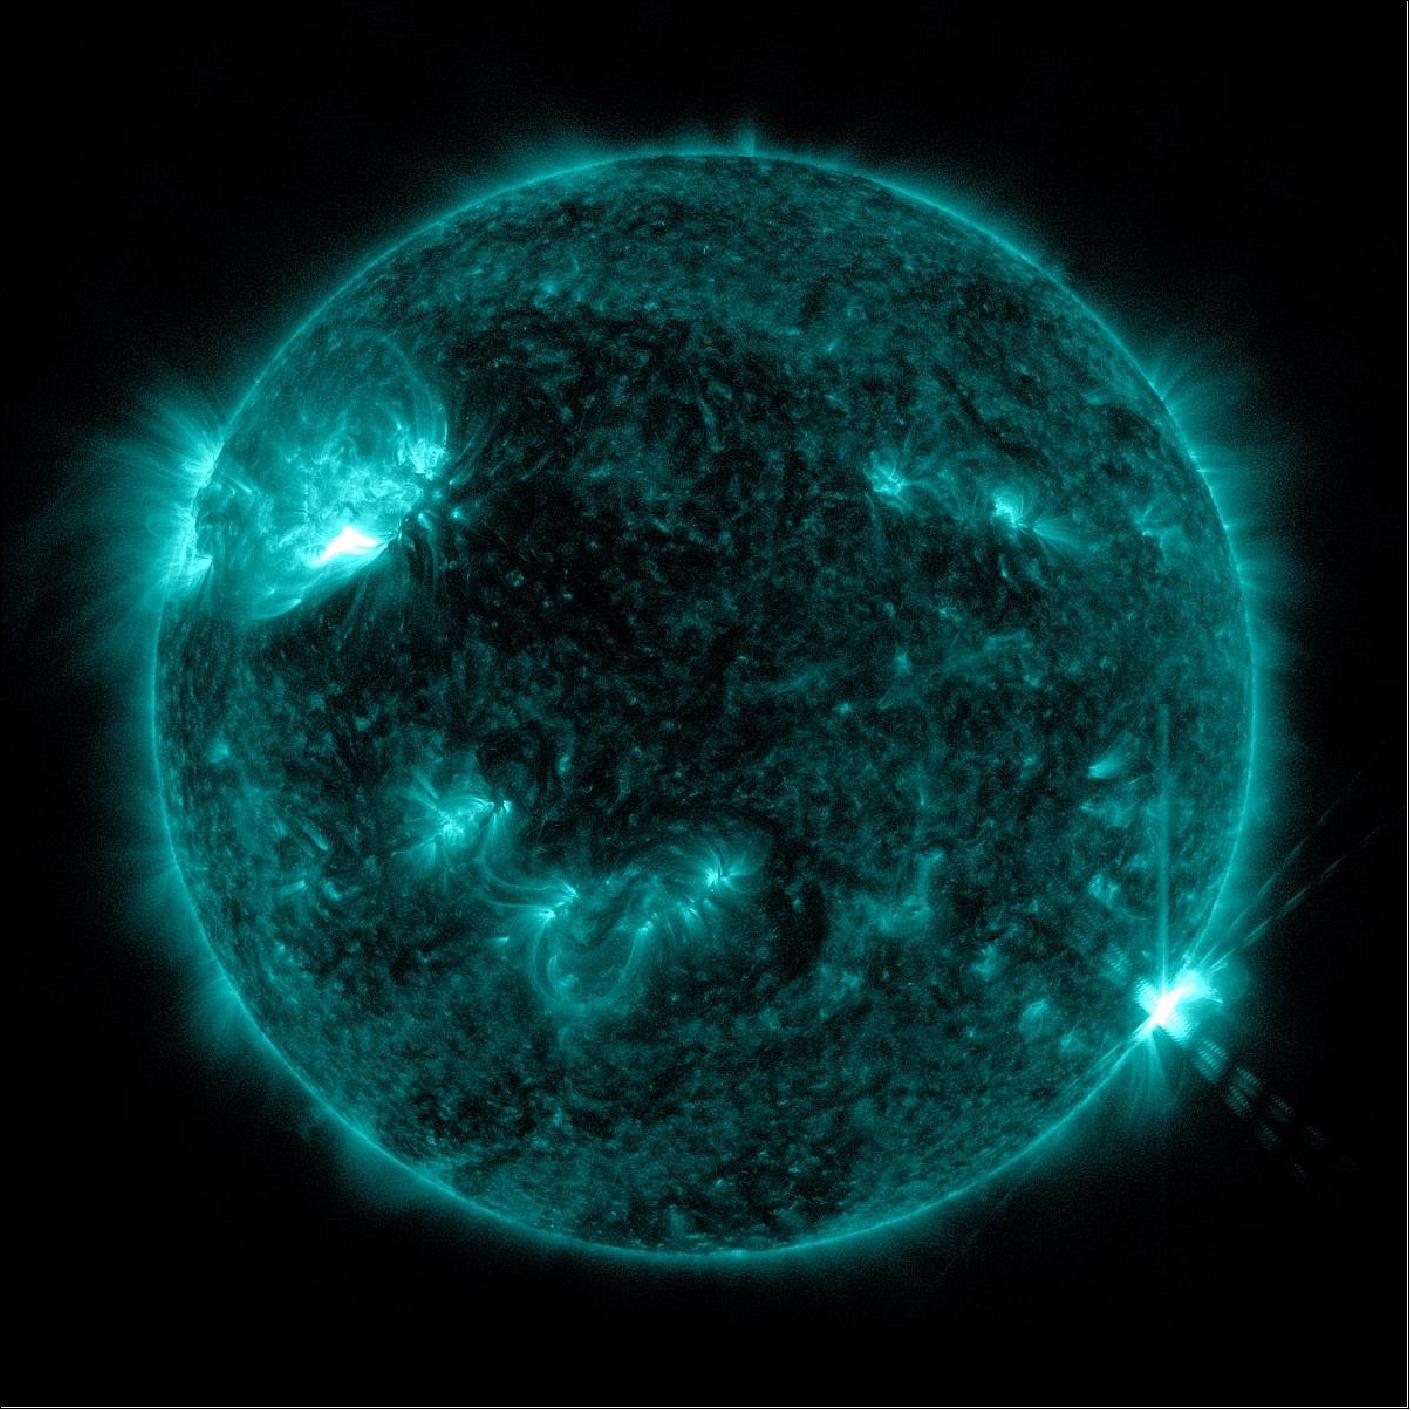 Figure 13: NASA's SDO captured this image of a solar flare – as seen in the bright flash in the lower right portion of the image– at 9:35 p.m. EST on April 19, 2022. The image shows a subset of extreme UV light that highlights the extremely hot material in flares and is colorized in SDO channel color blue (image credit: NASA/SDO)